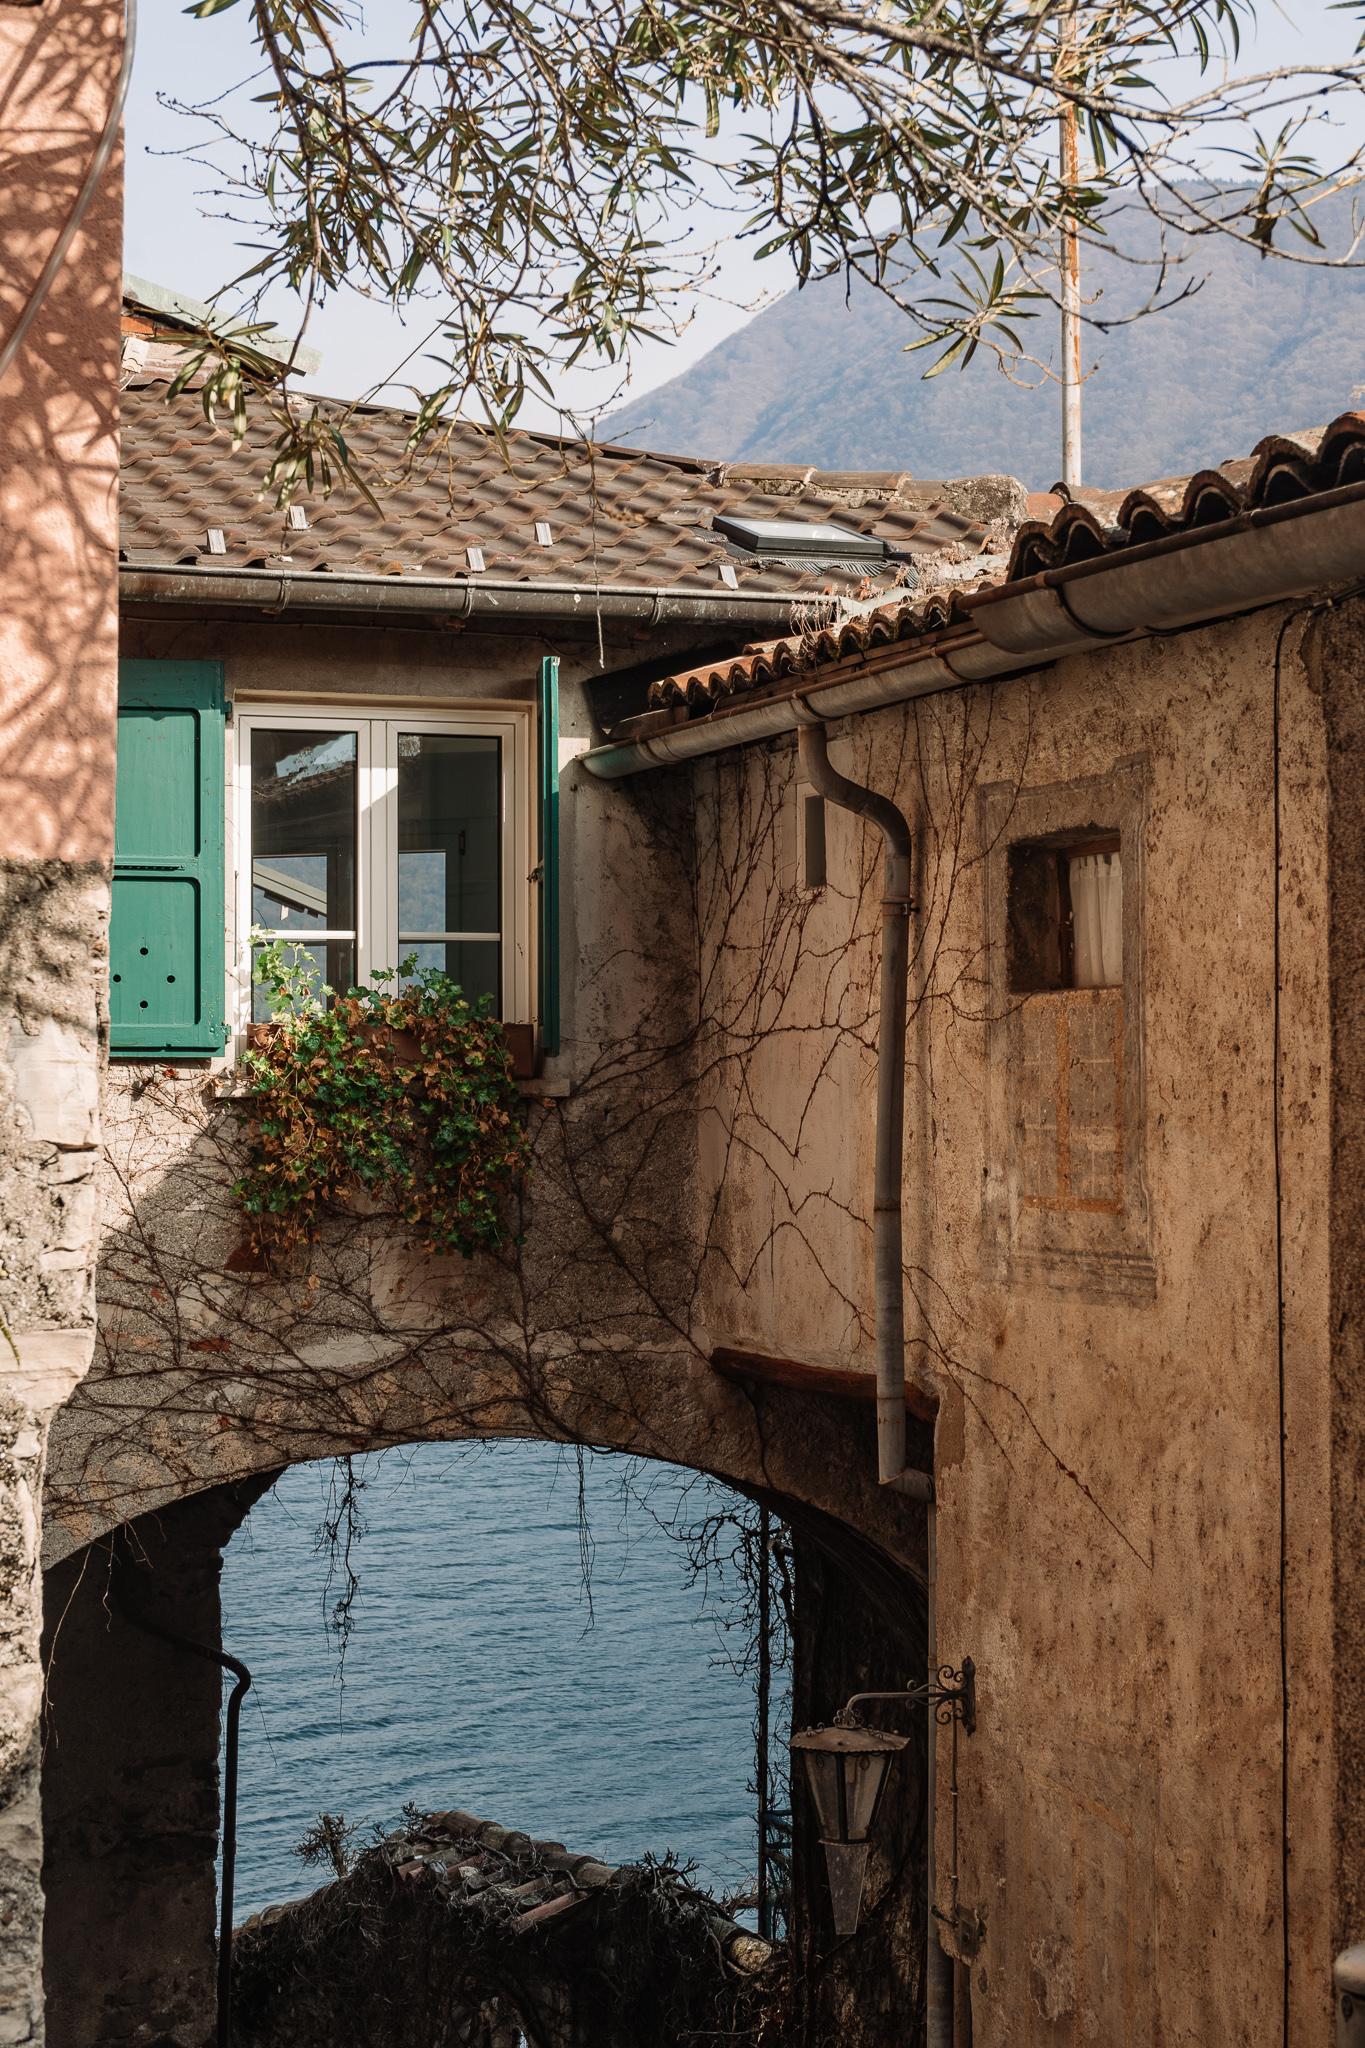 An old arch in Gandria, Ticino Switzerland with the lake behind